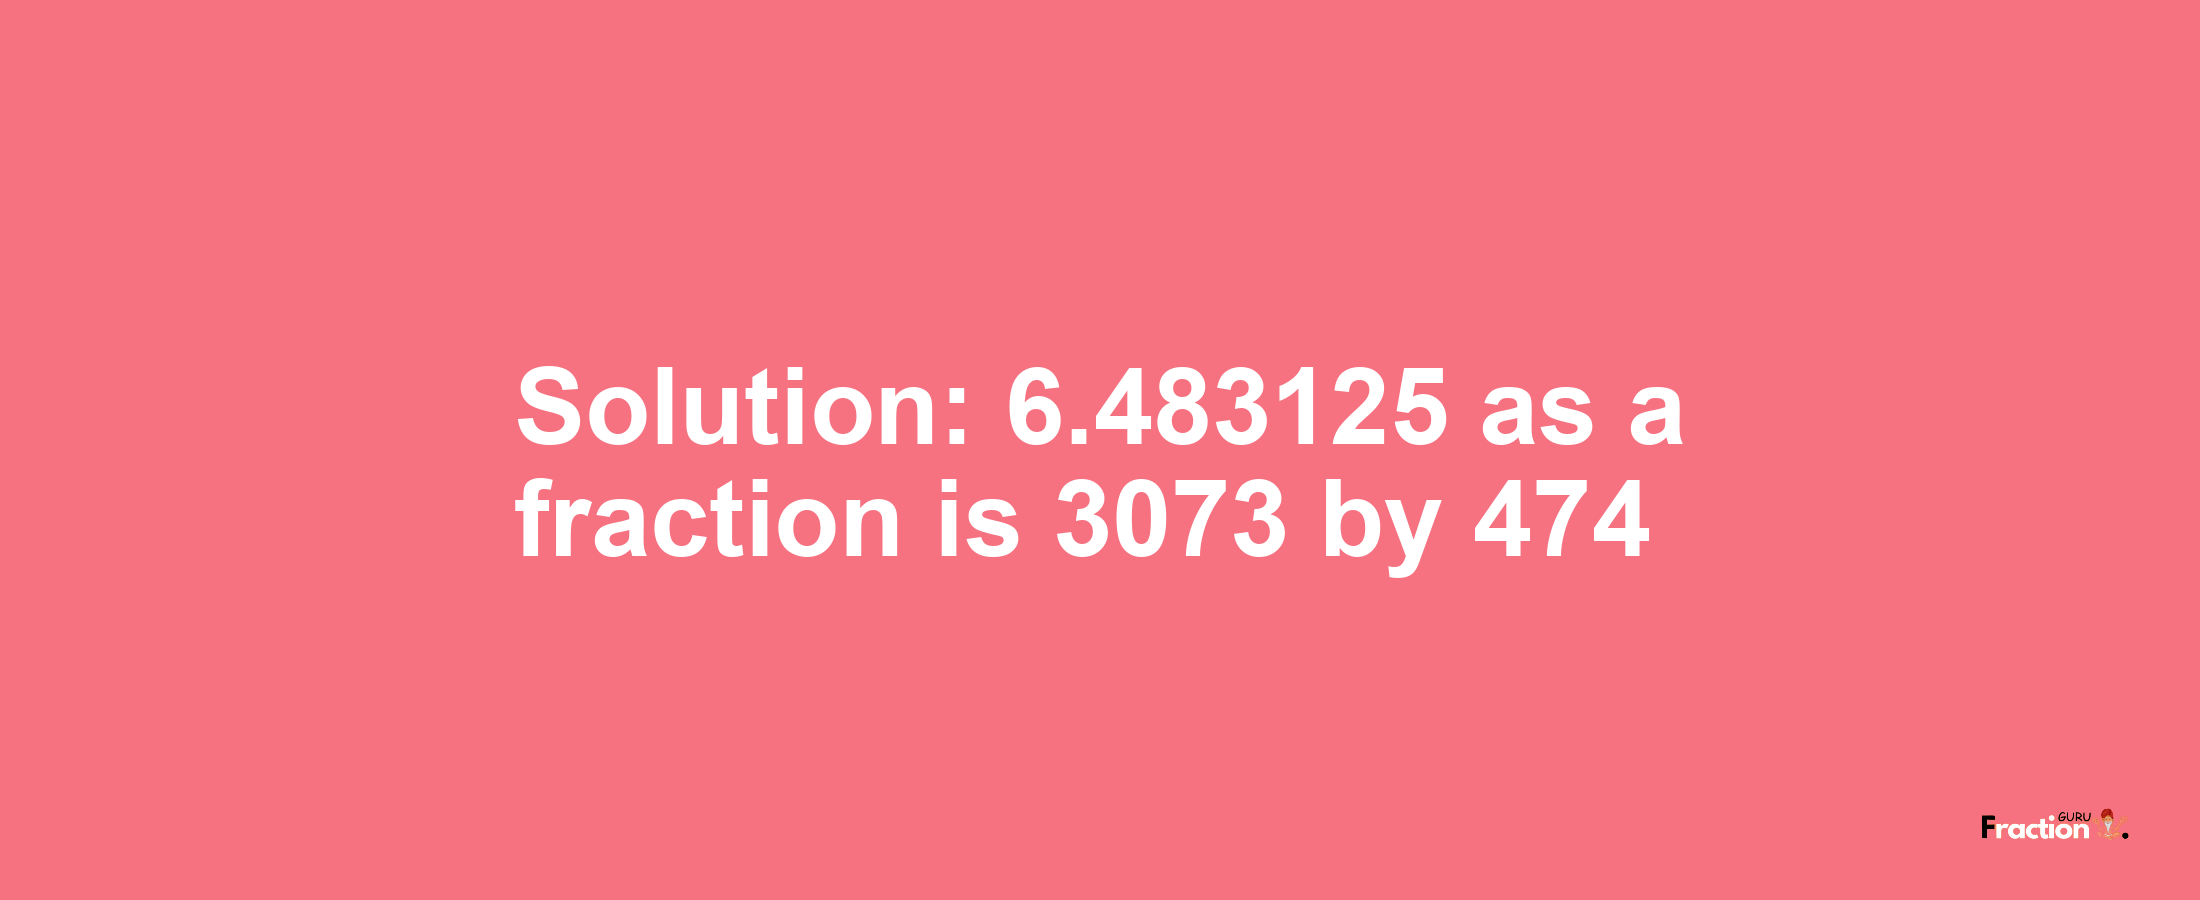 Solution:6.483125 as a fraction is 3073/474